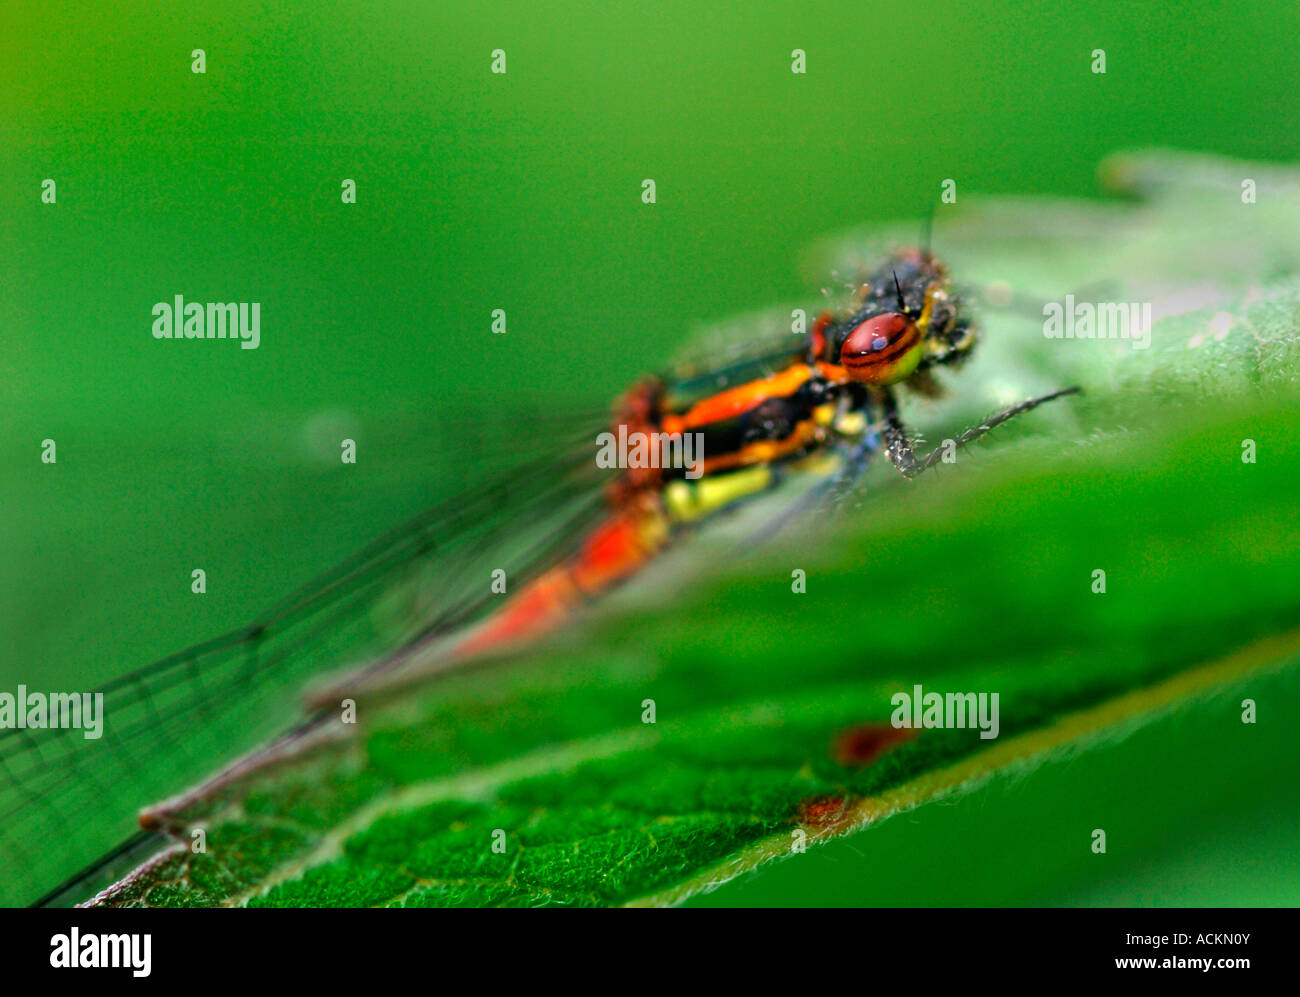 A Portrait Of A Large Red Damselfly.(Pyrrhosoma nymphula). Stock Photo